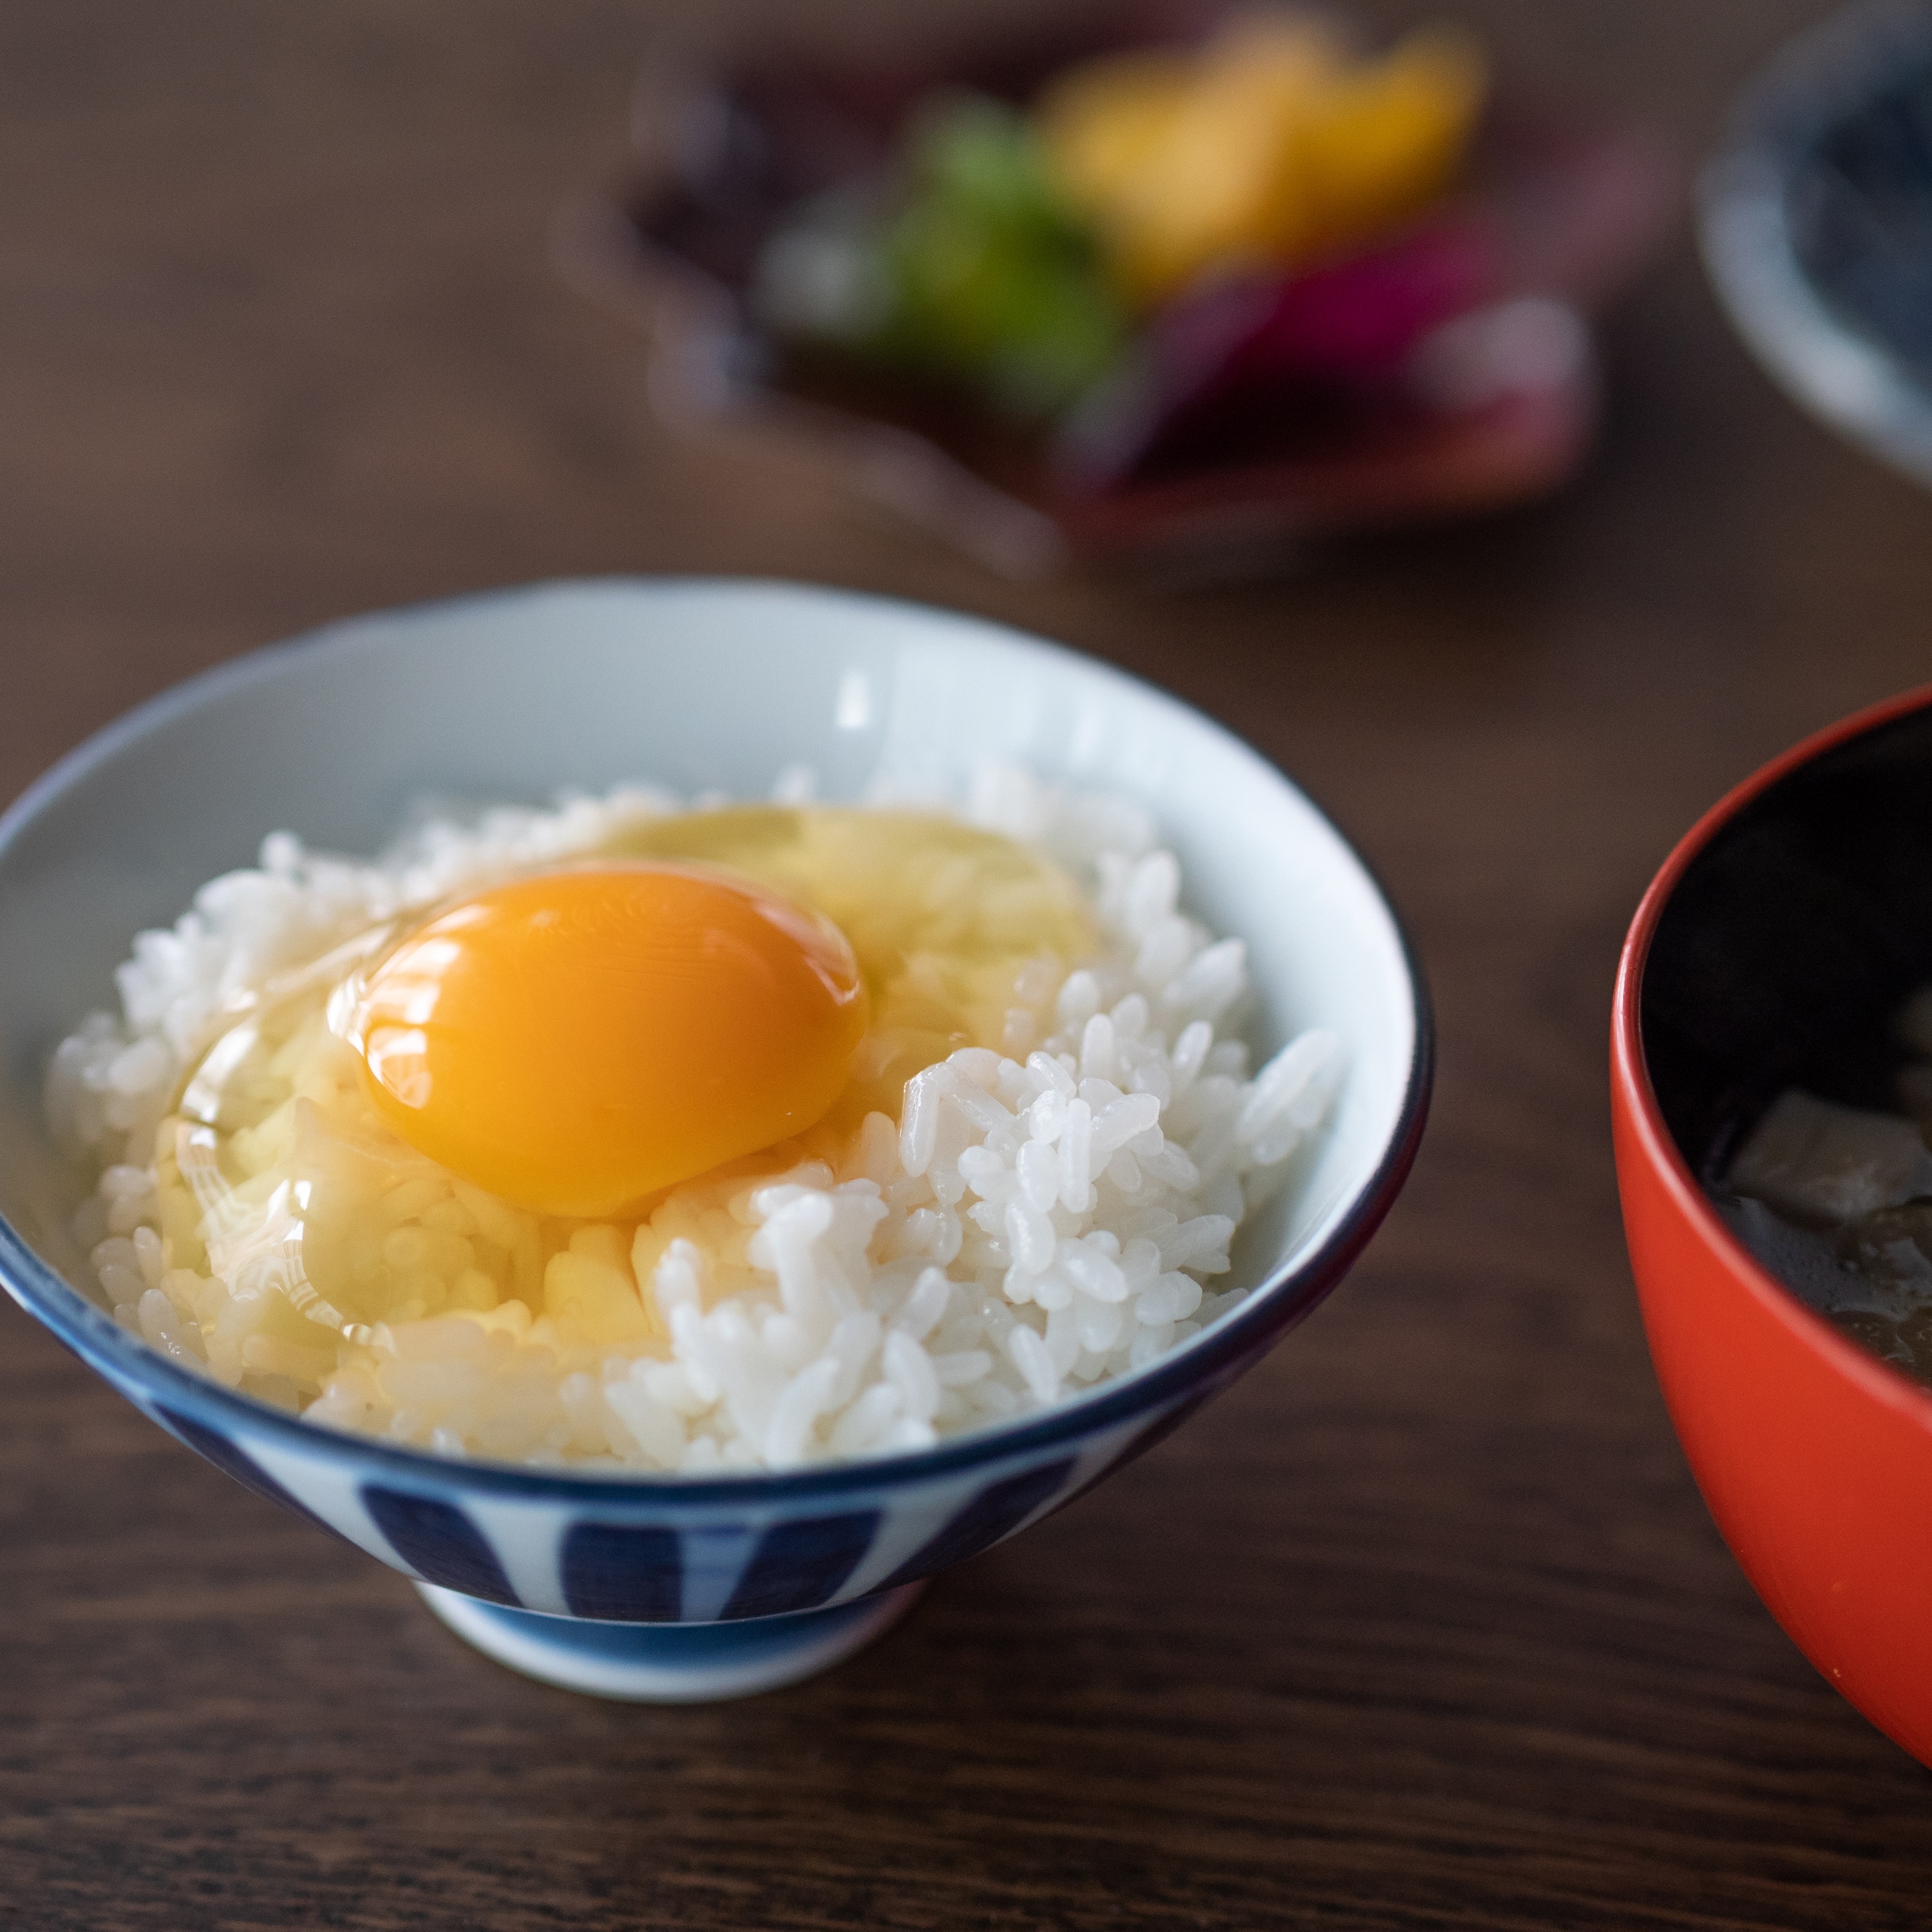 A simple and delicious complimentary breakfast (five items: egg over rice, miso soup, pickles, and furikake)